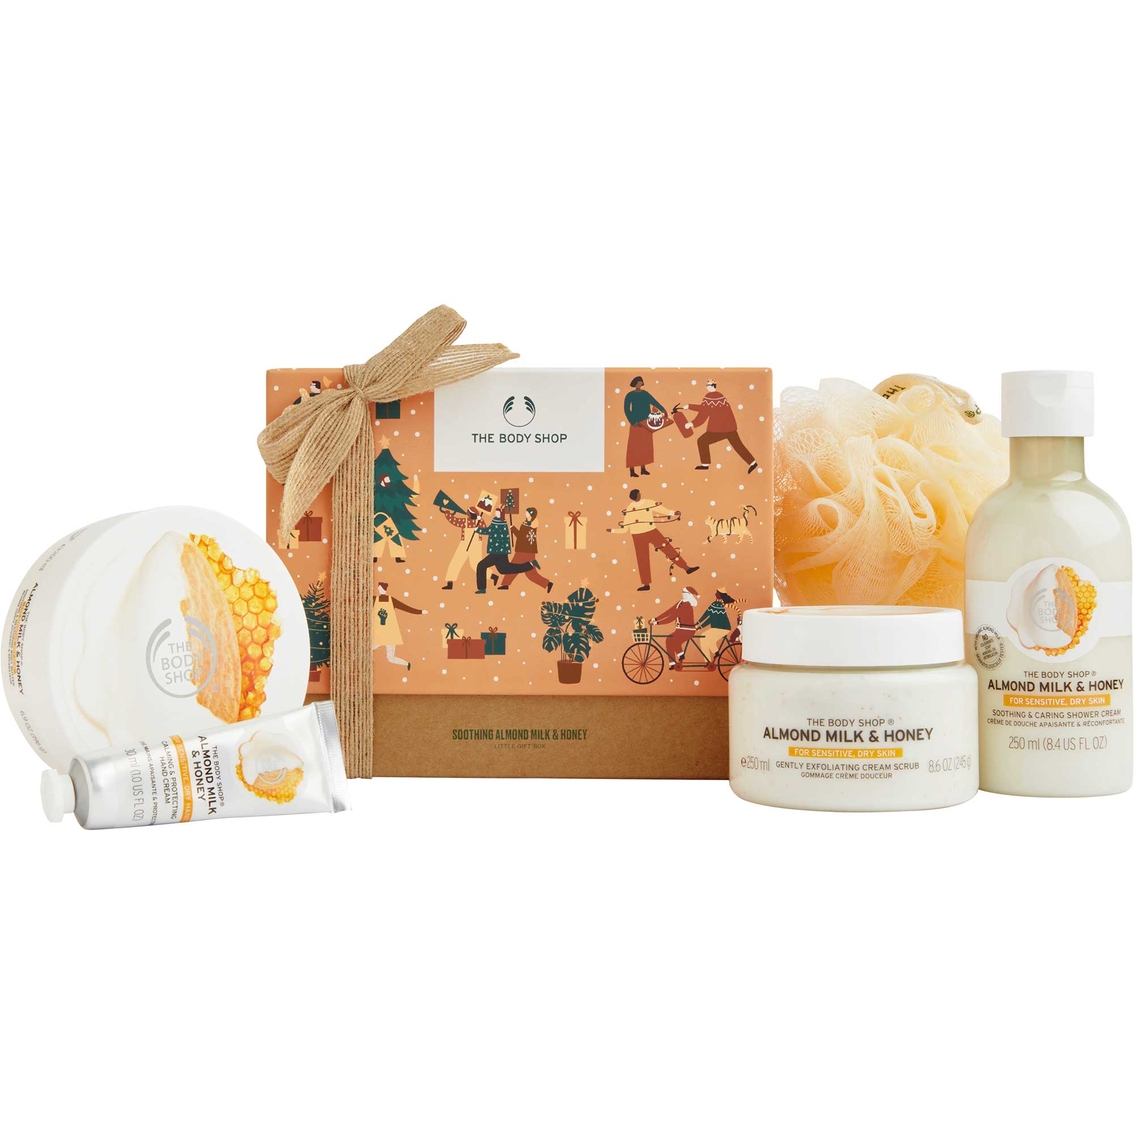 Begraafplaats Proficiat Namaak The Body Shop Soothing Almond Milk And Honey Big Gift Box | Body & Bath Gift  Sets | Valentine's Gift Guide | Shop The Exchange